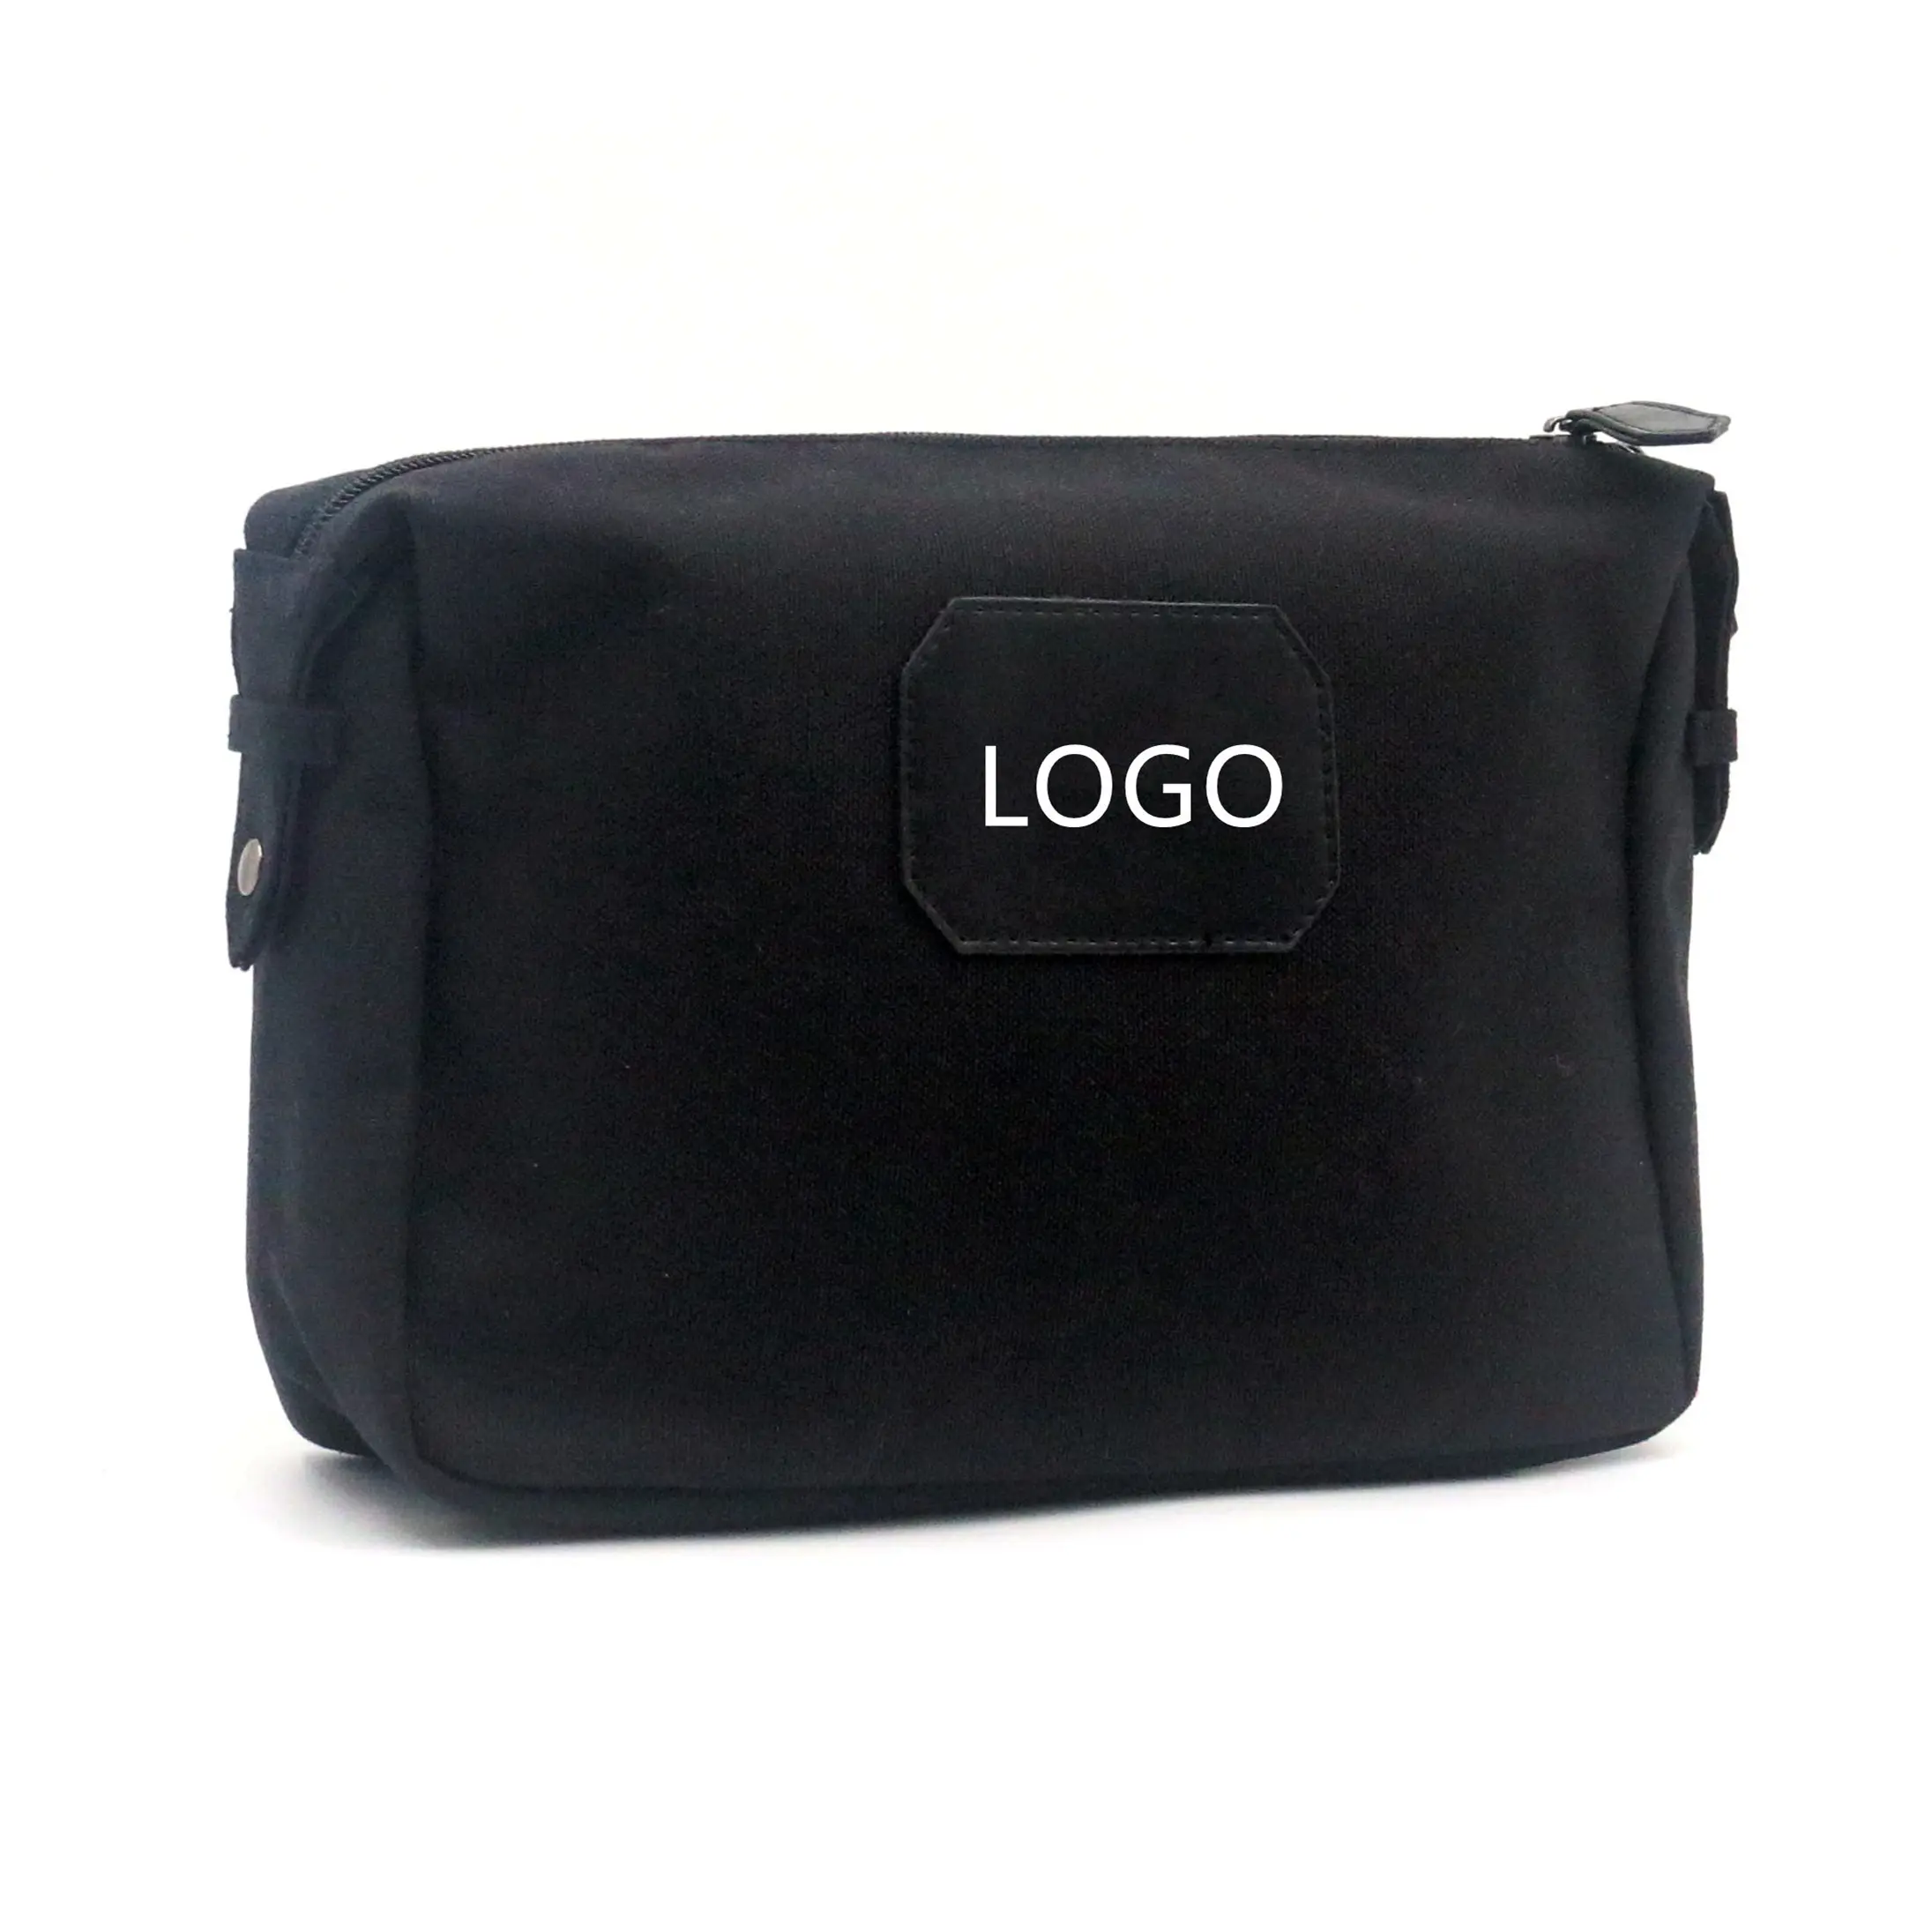 2023 New Product Eco-friendly Canvas Toiletry Bag Exquisite Design Classic Square Shape Black Canvas Durable Fabric Cosmetic Bag